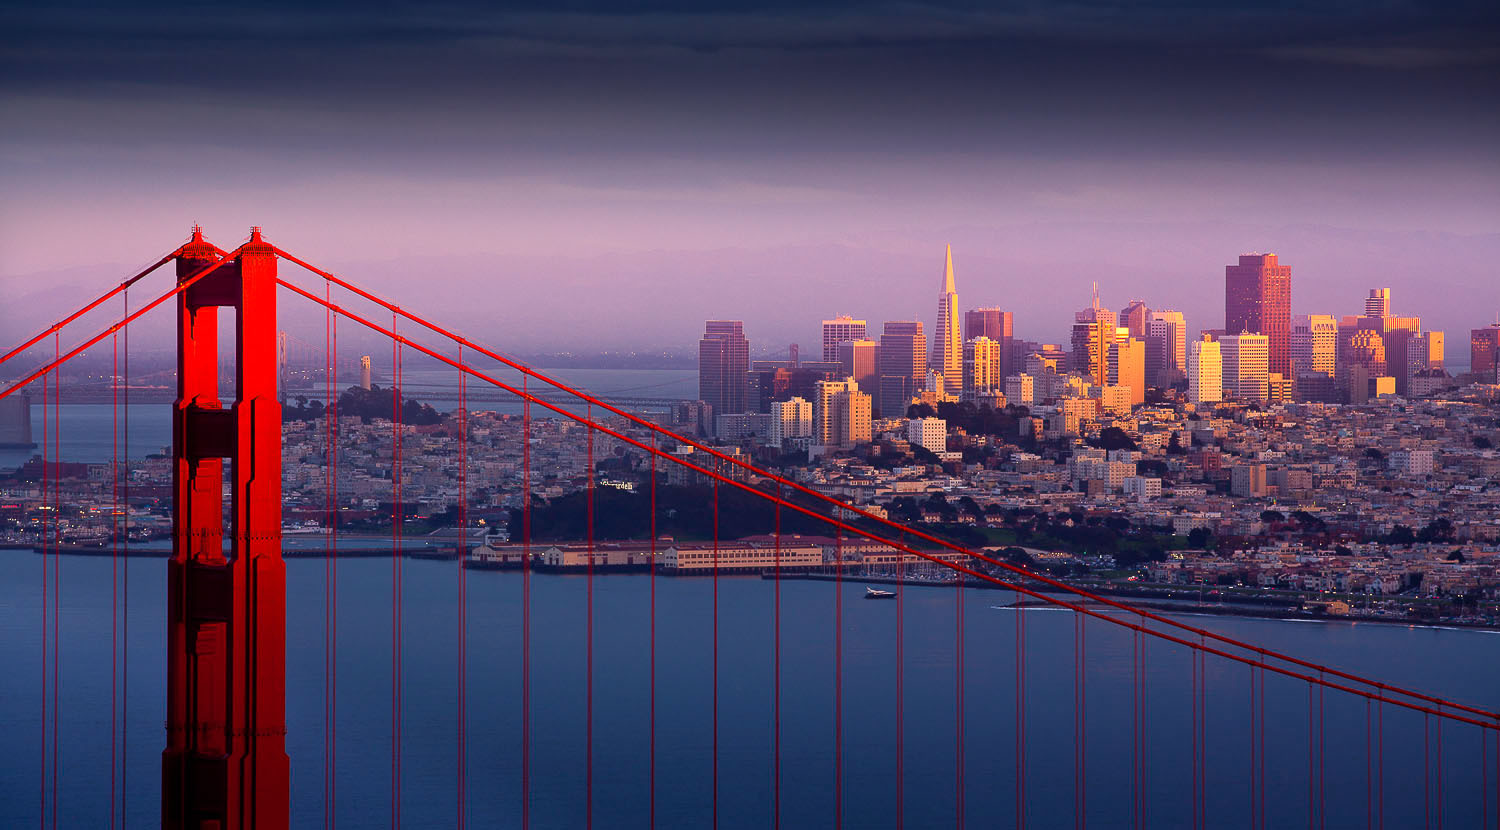 Raleigh NC to San Francisco or Vice Versa $98 RT Airfares on Frontier Airlines (Travel March - May 2021)